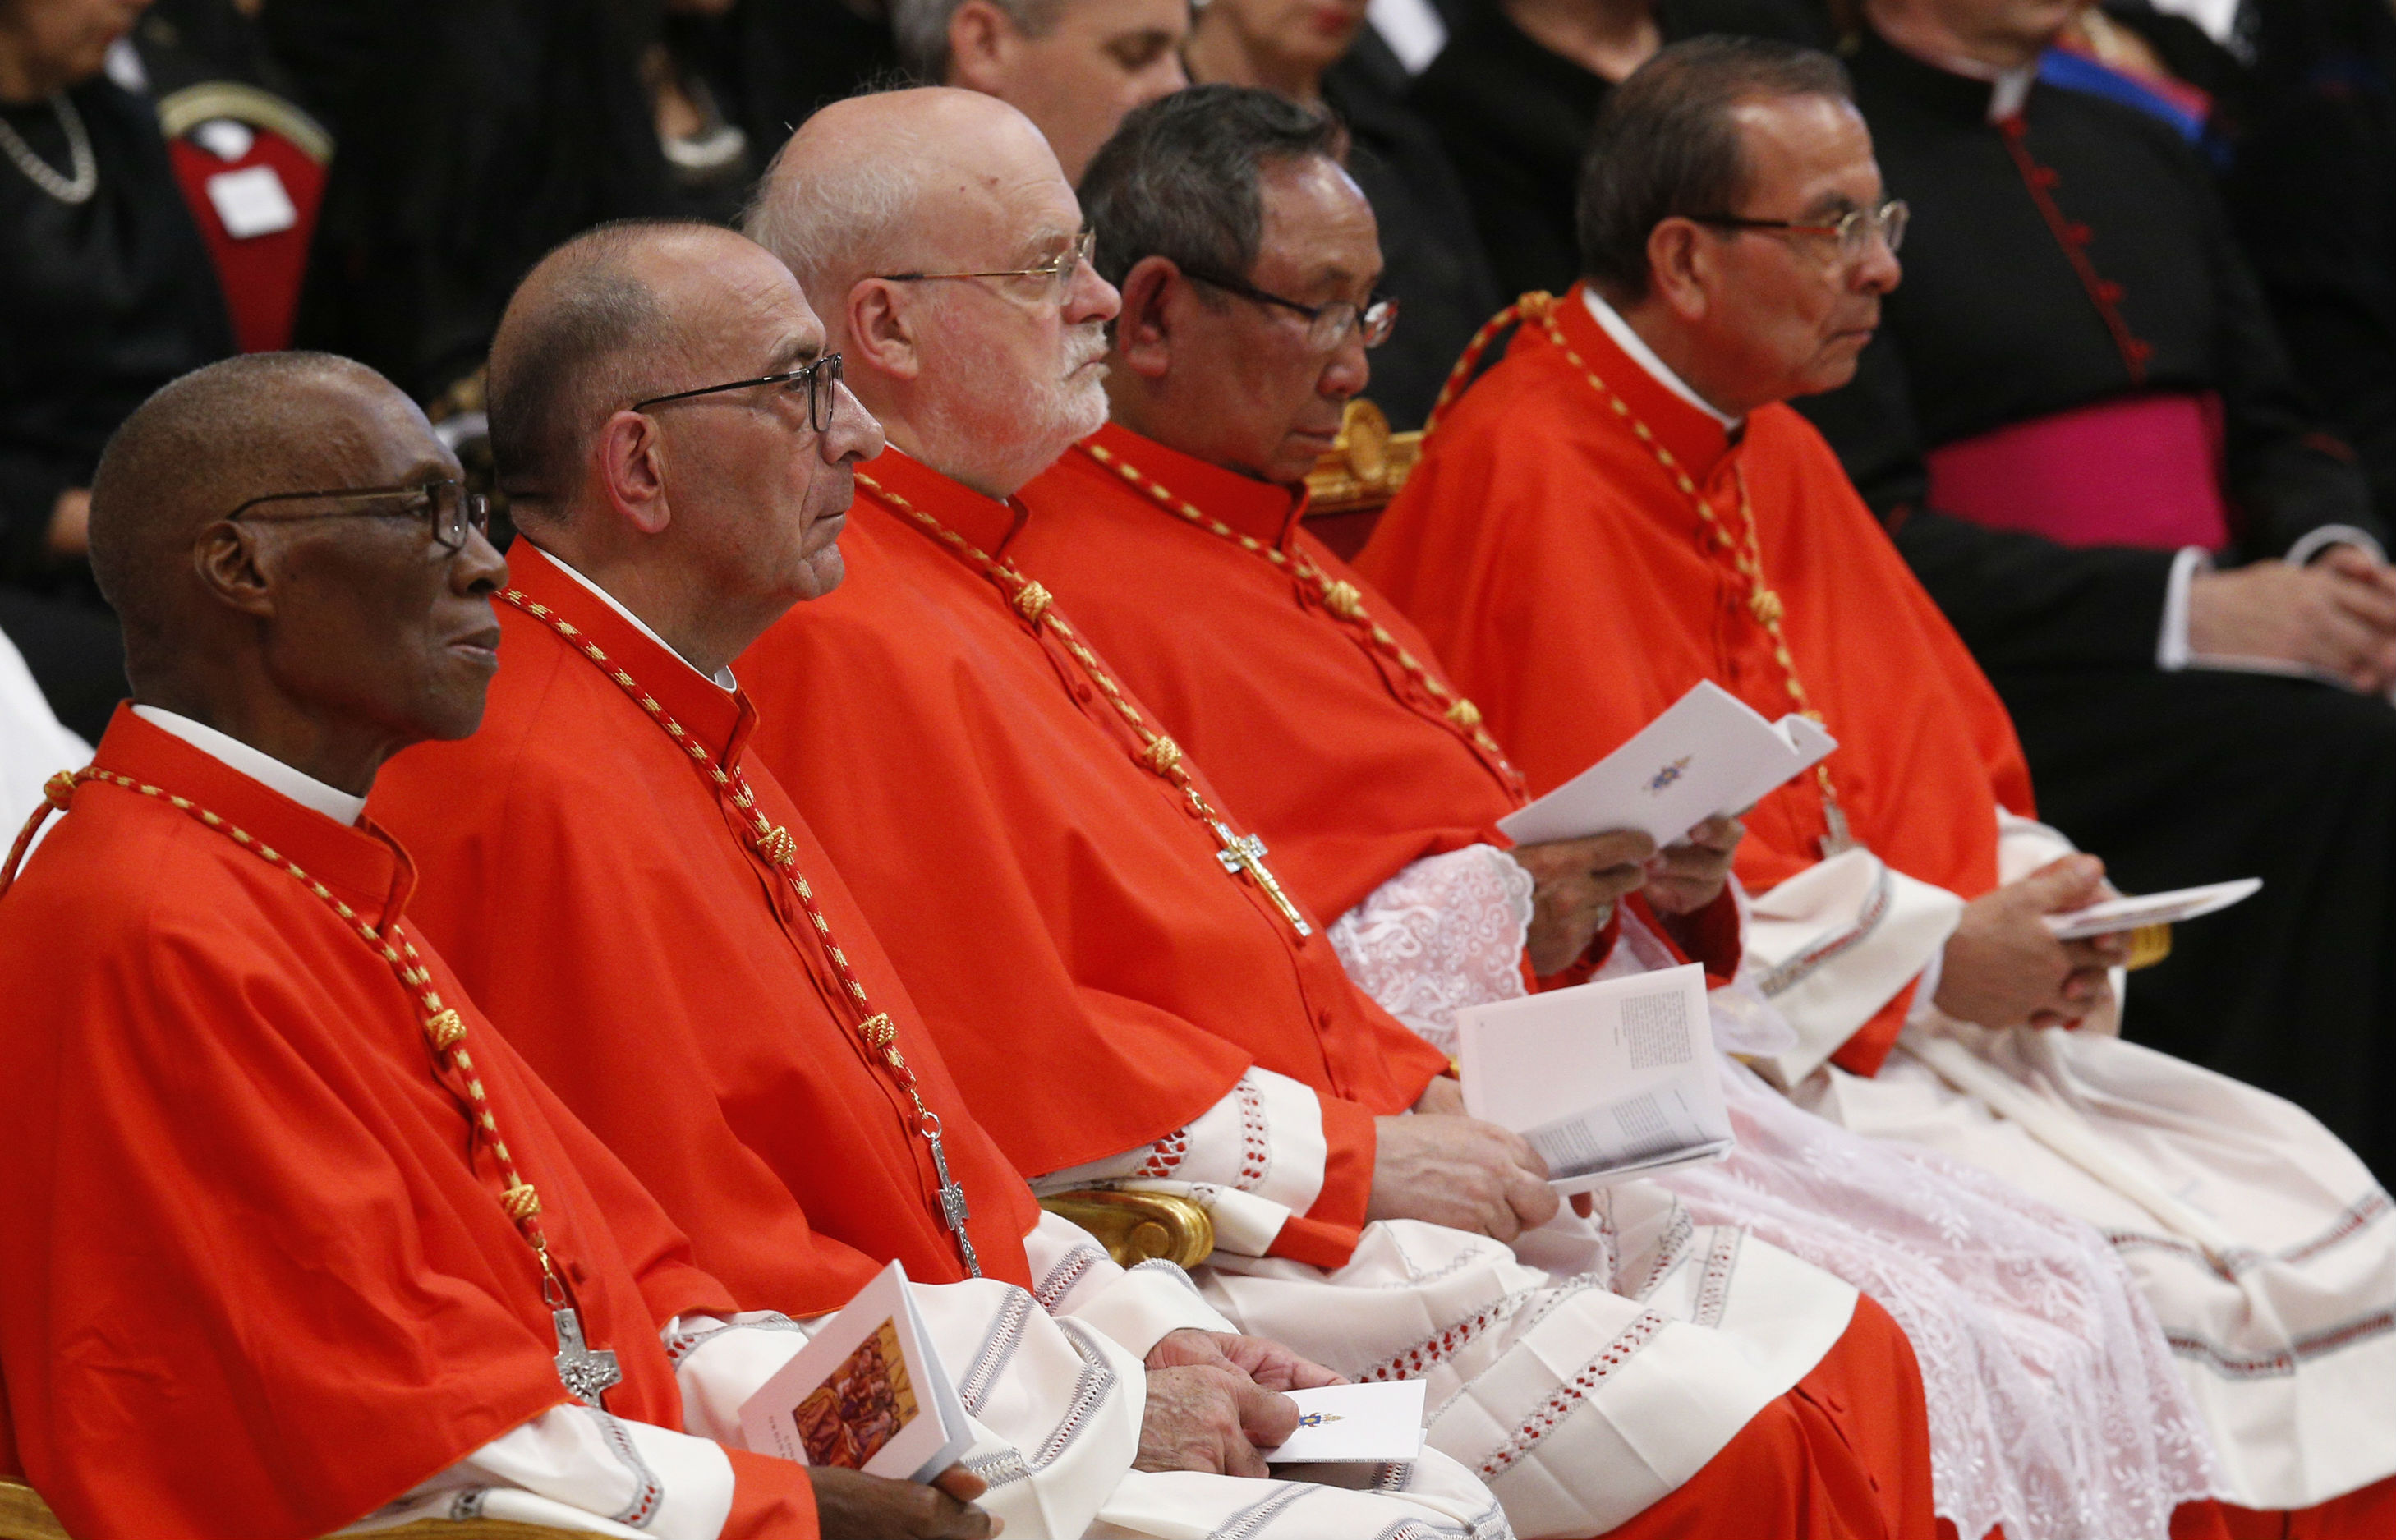 Avoid becoming 'Princes' of the church and serve suffering humanity, Pope urges new cardinals 